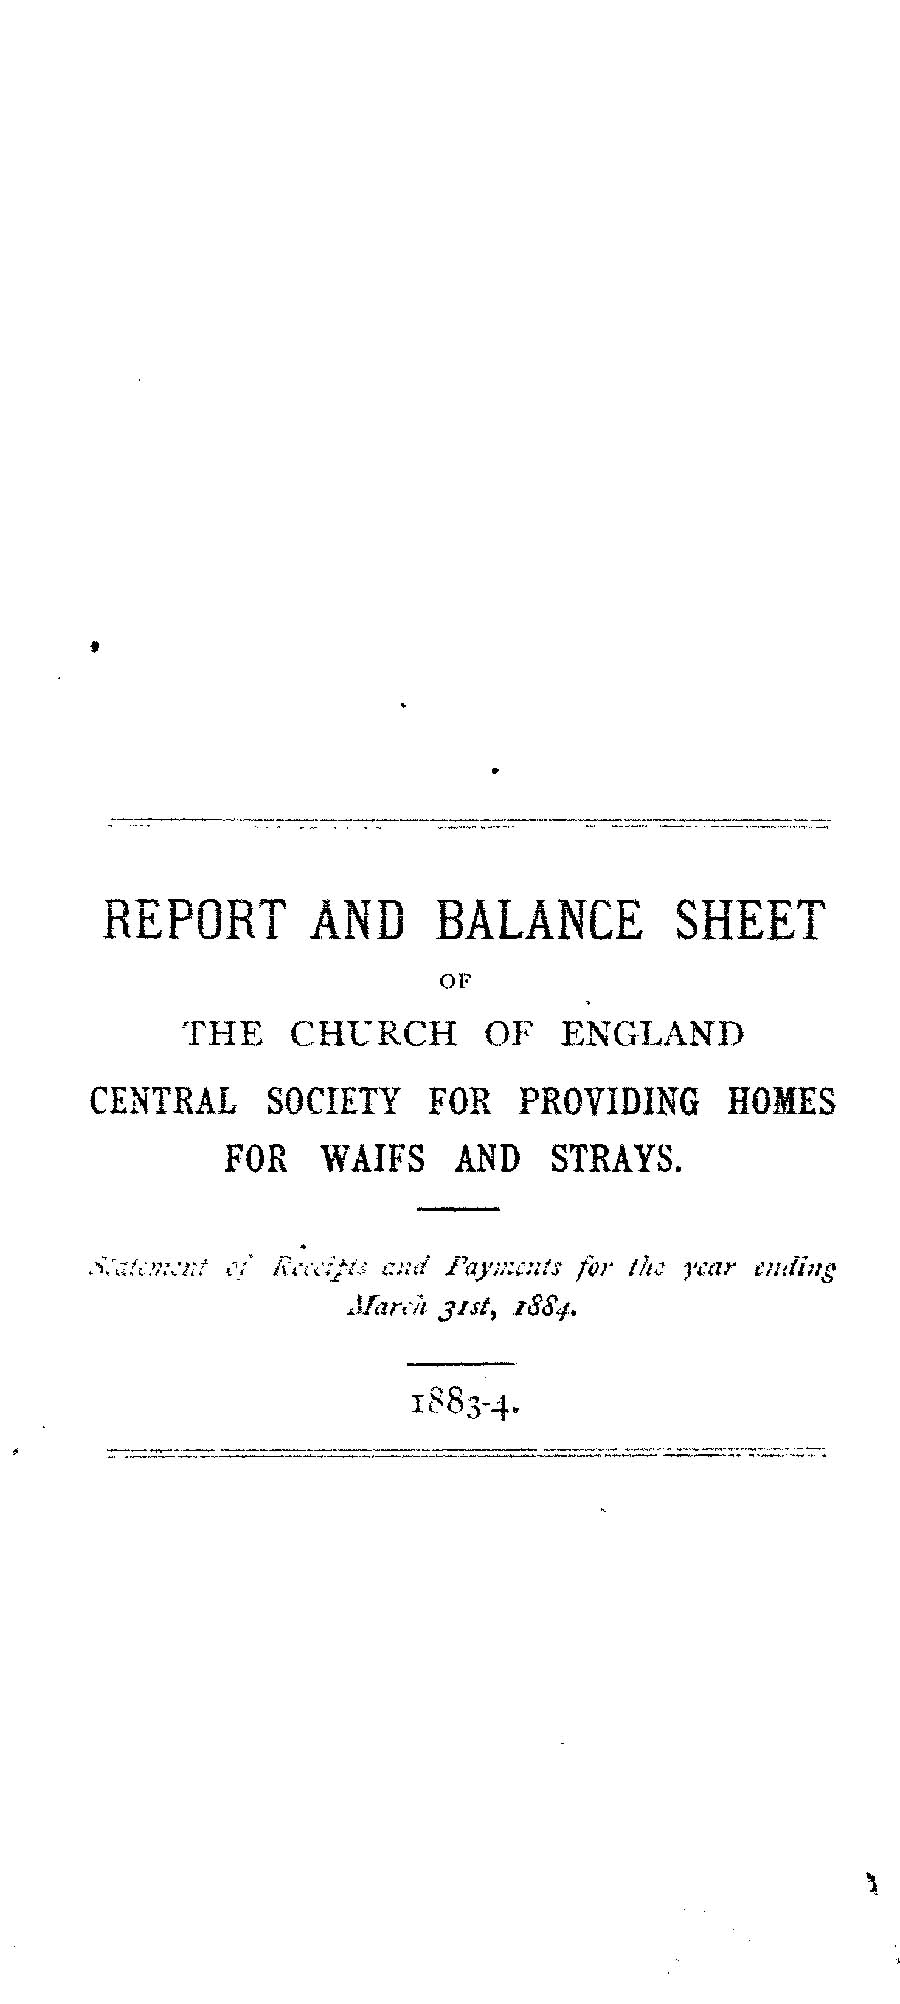 Annual Report 1884 - page 1